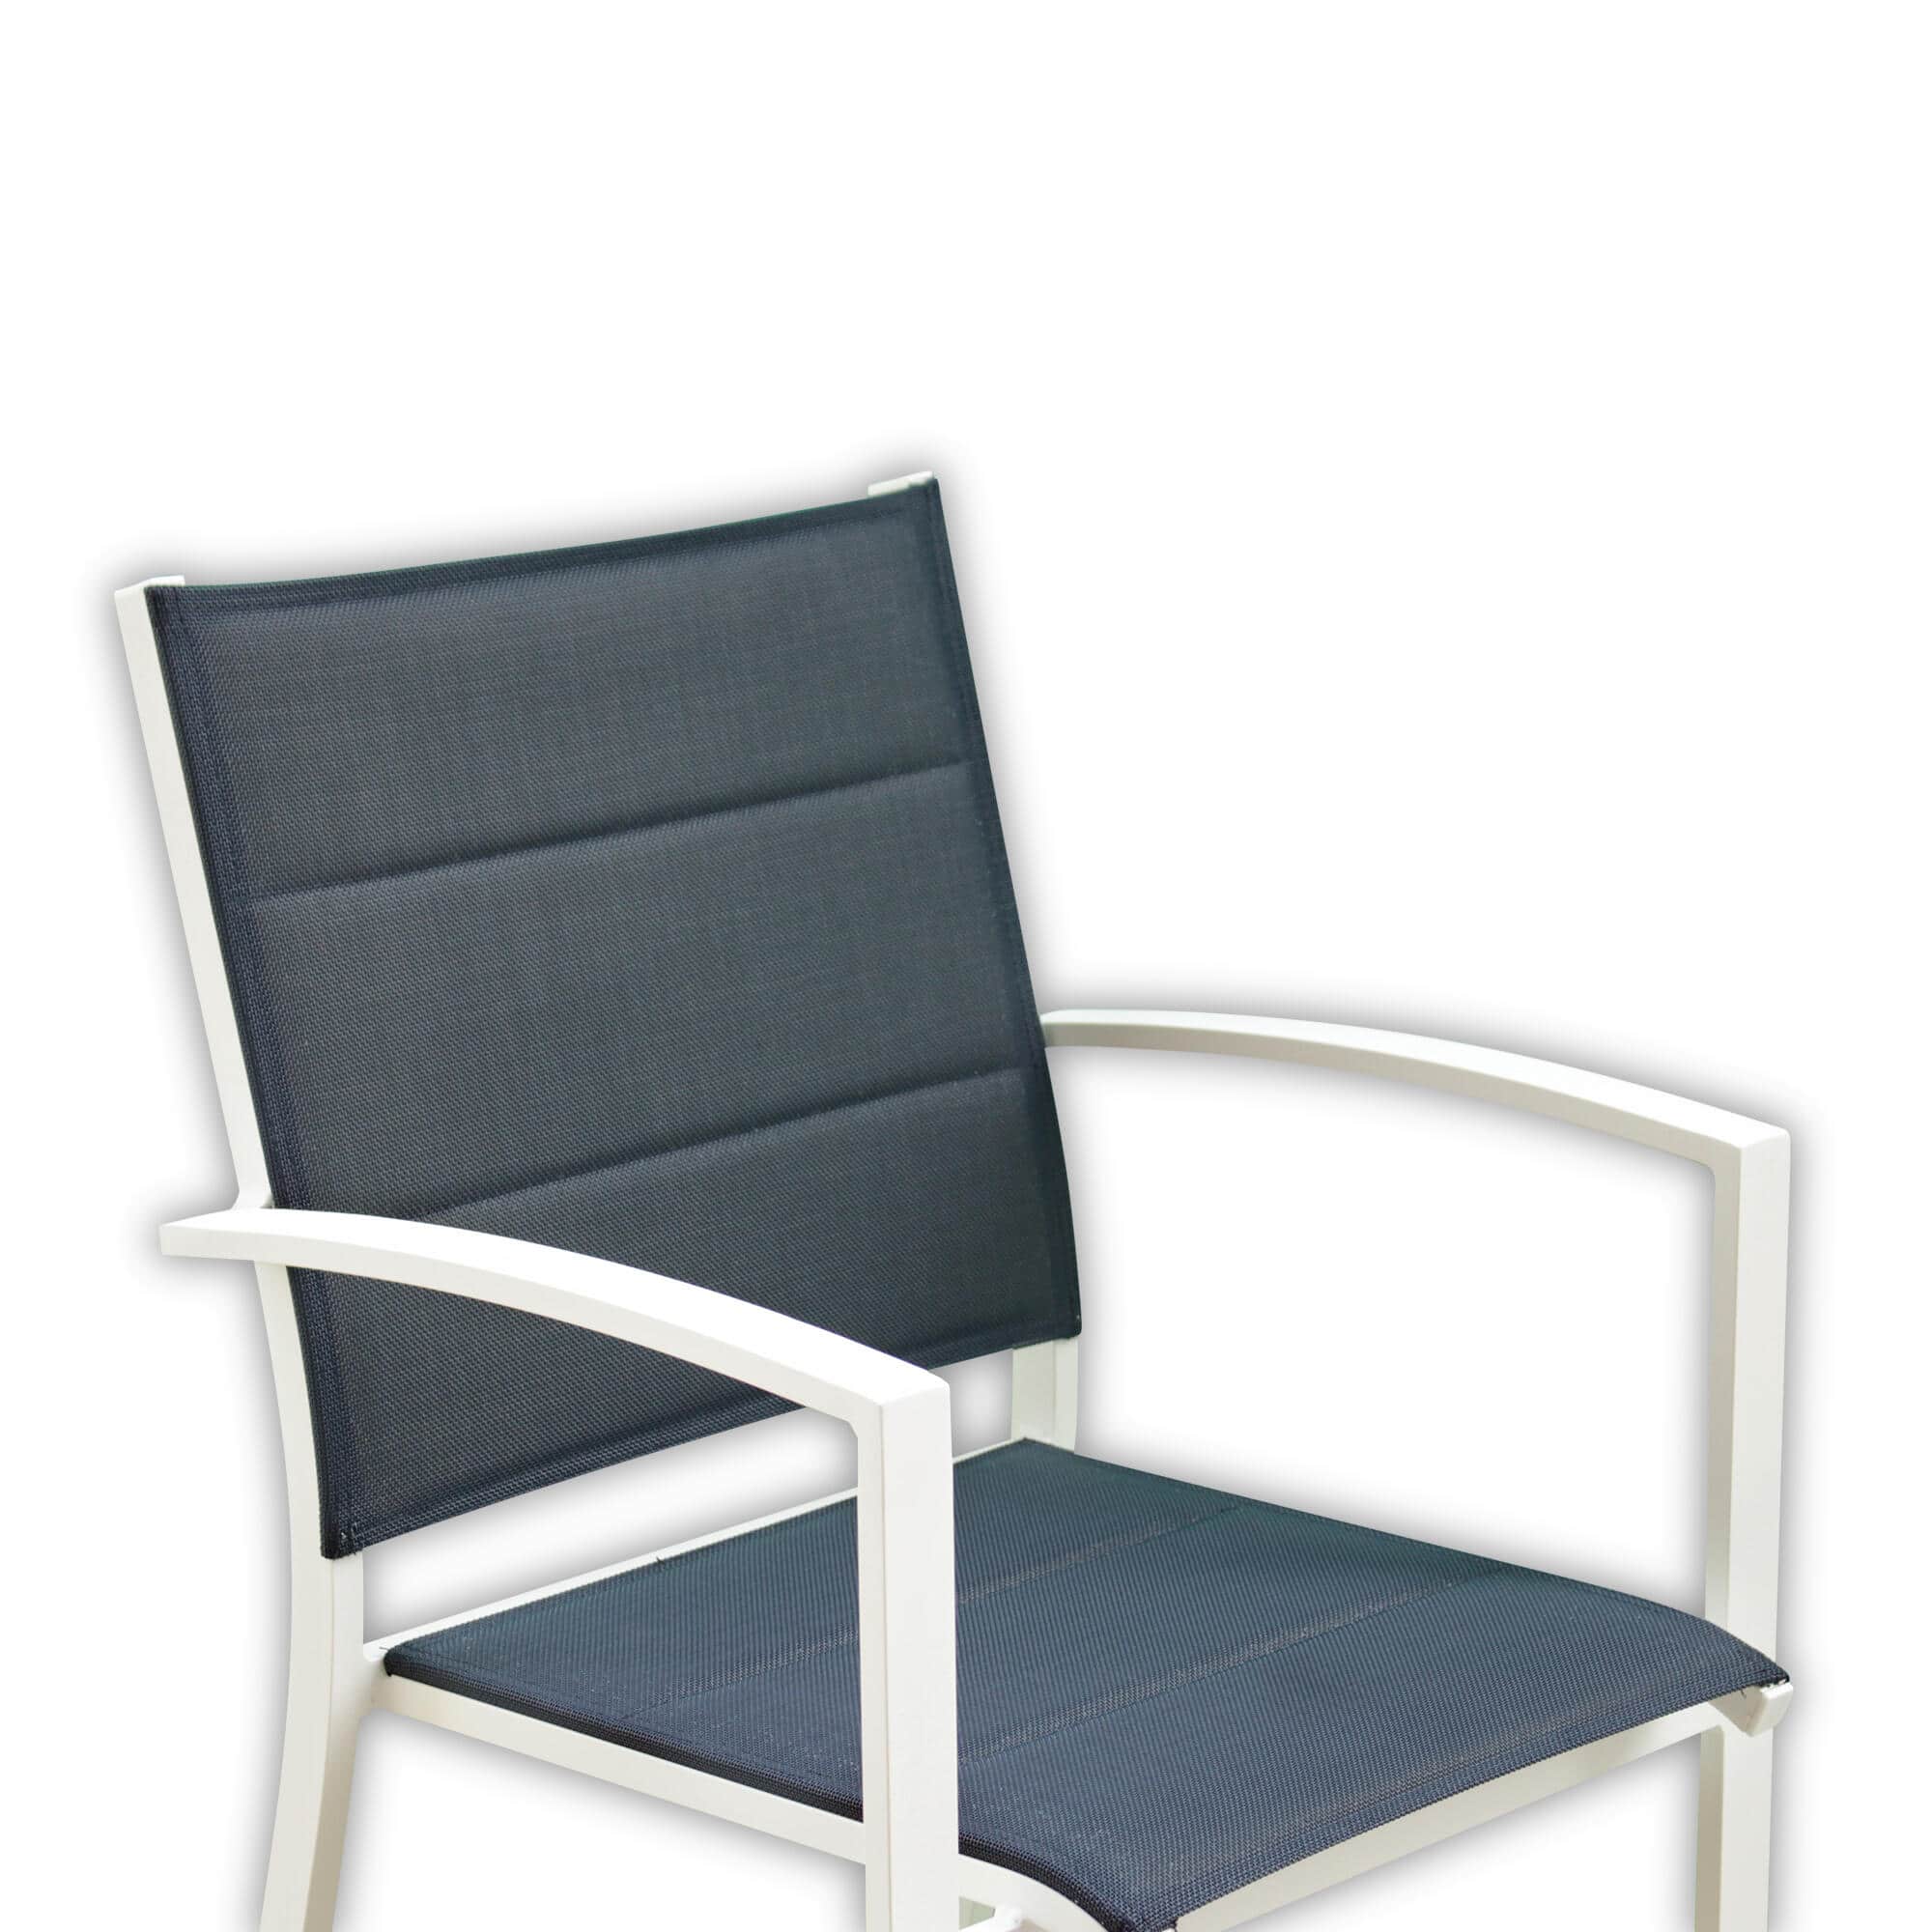 Courtyard Casual Outdoor Dining Chair Courtyard Casual -  Skyline White Aluminum Outdoor Padded Dining Chair, 4 pc Set | 5073